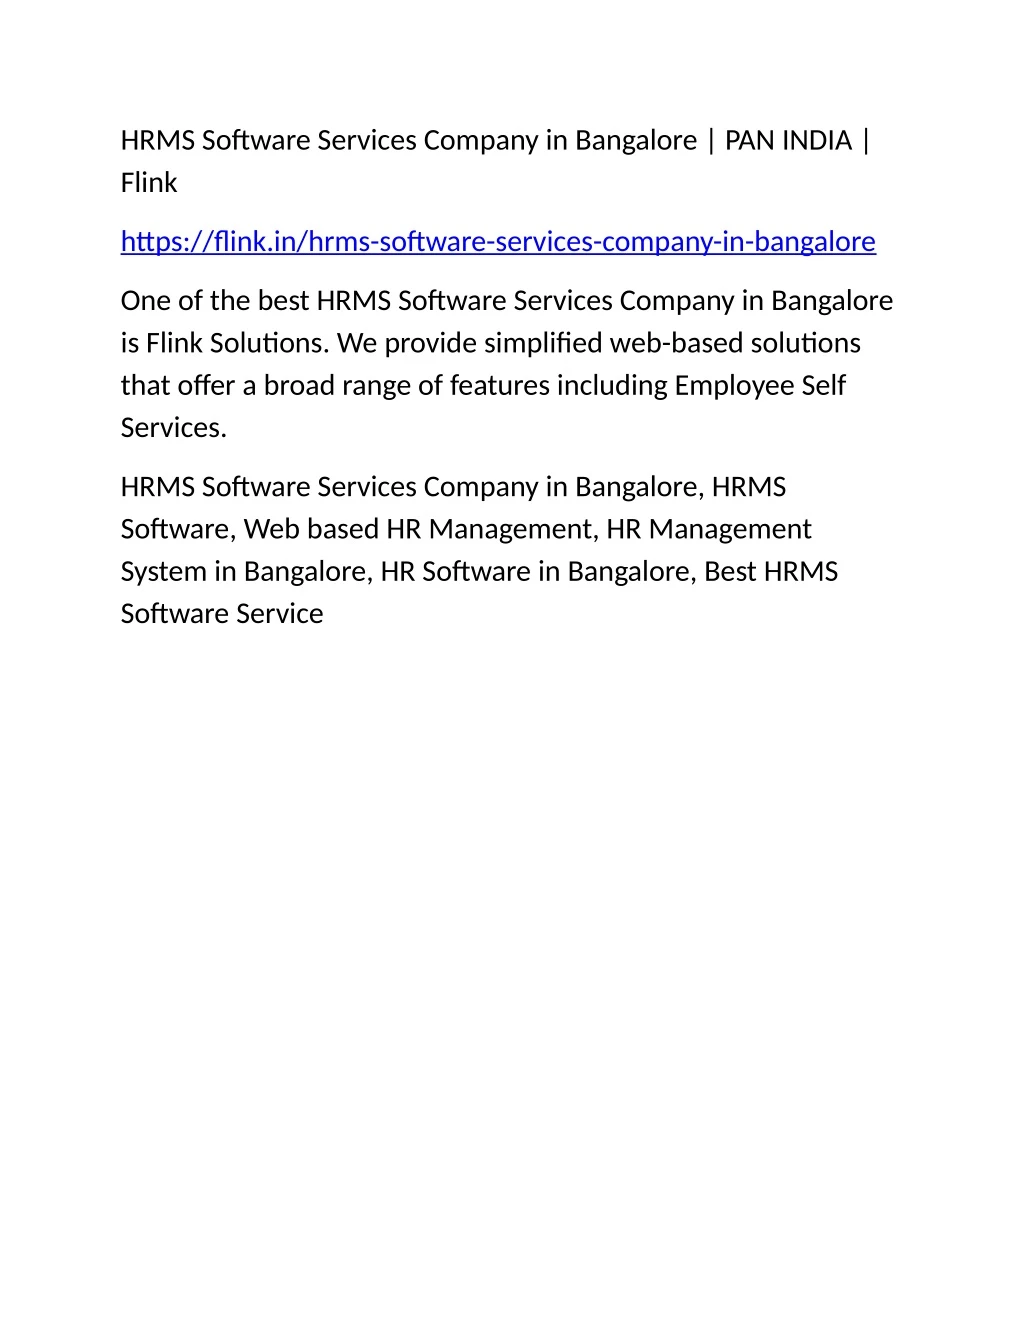 hrms software services company in bangalore